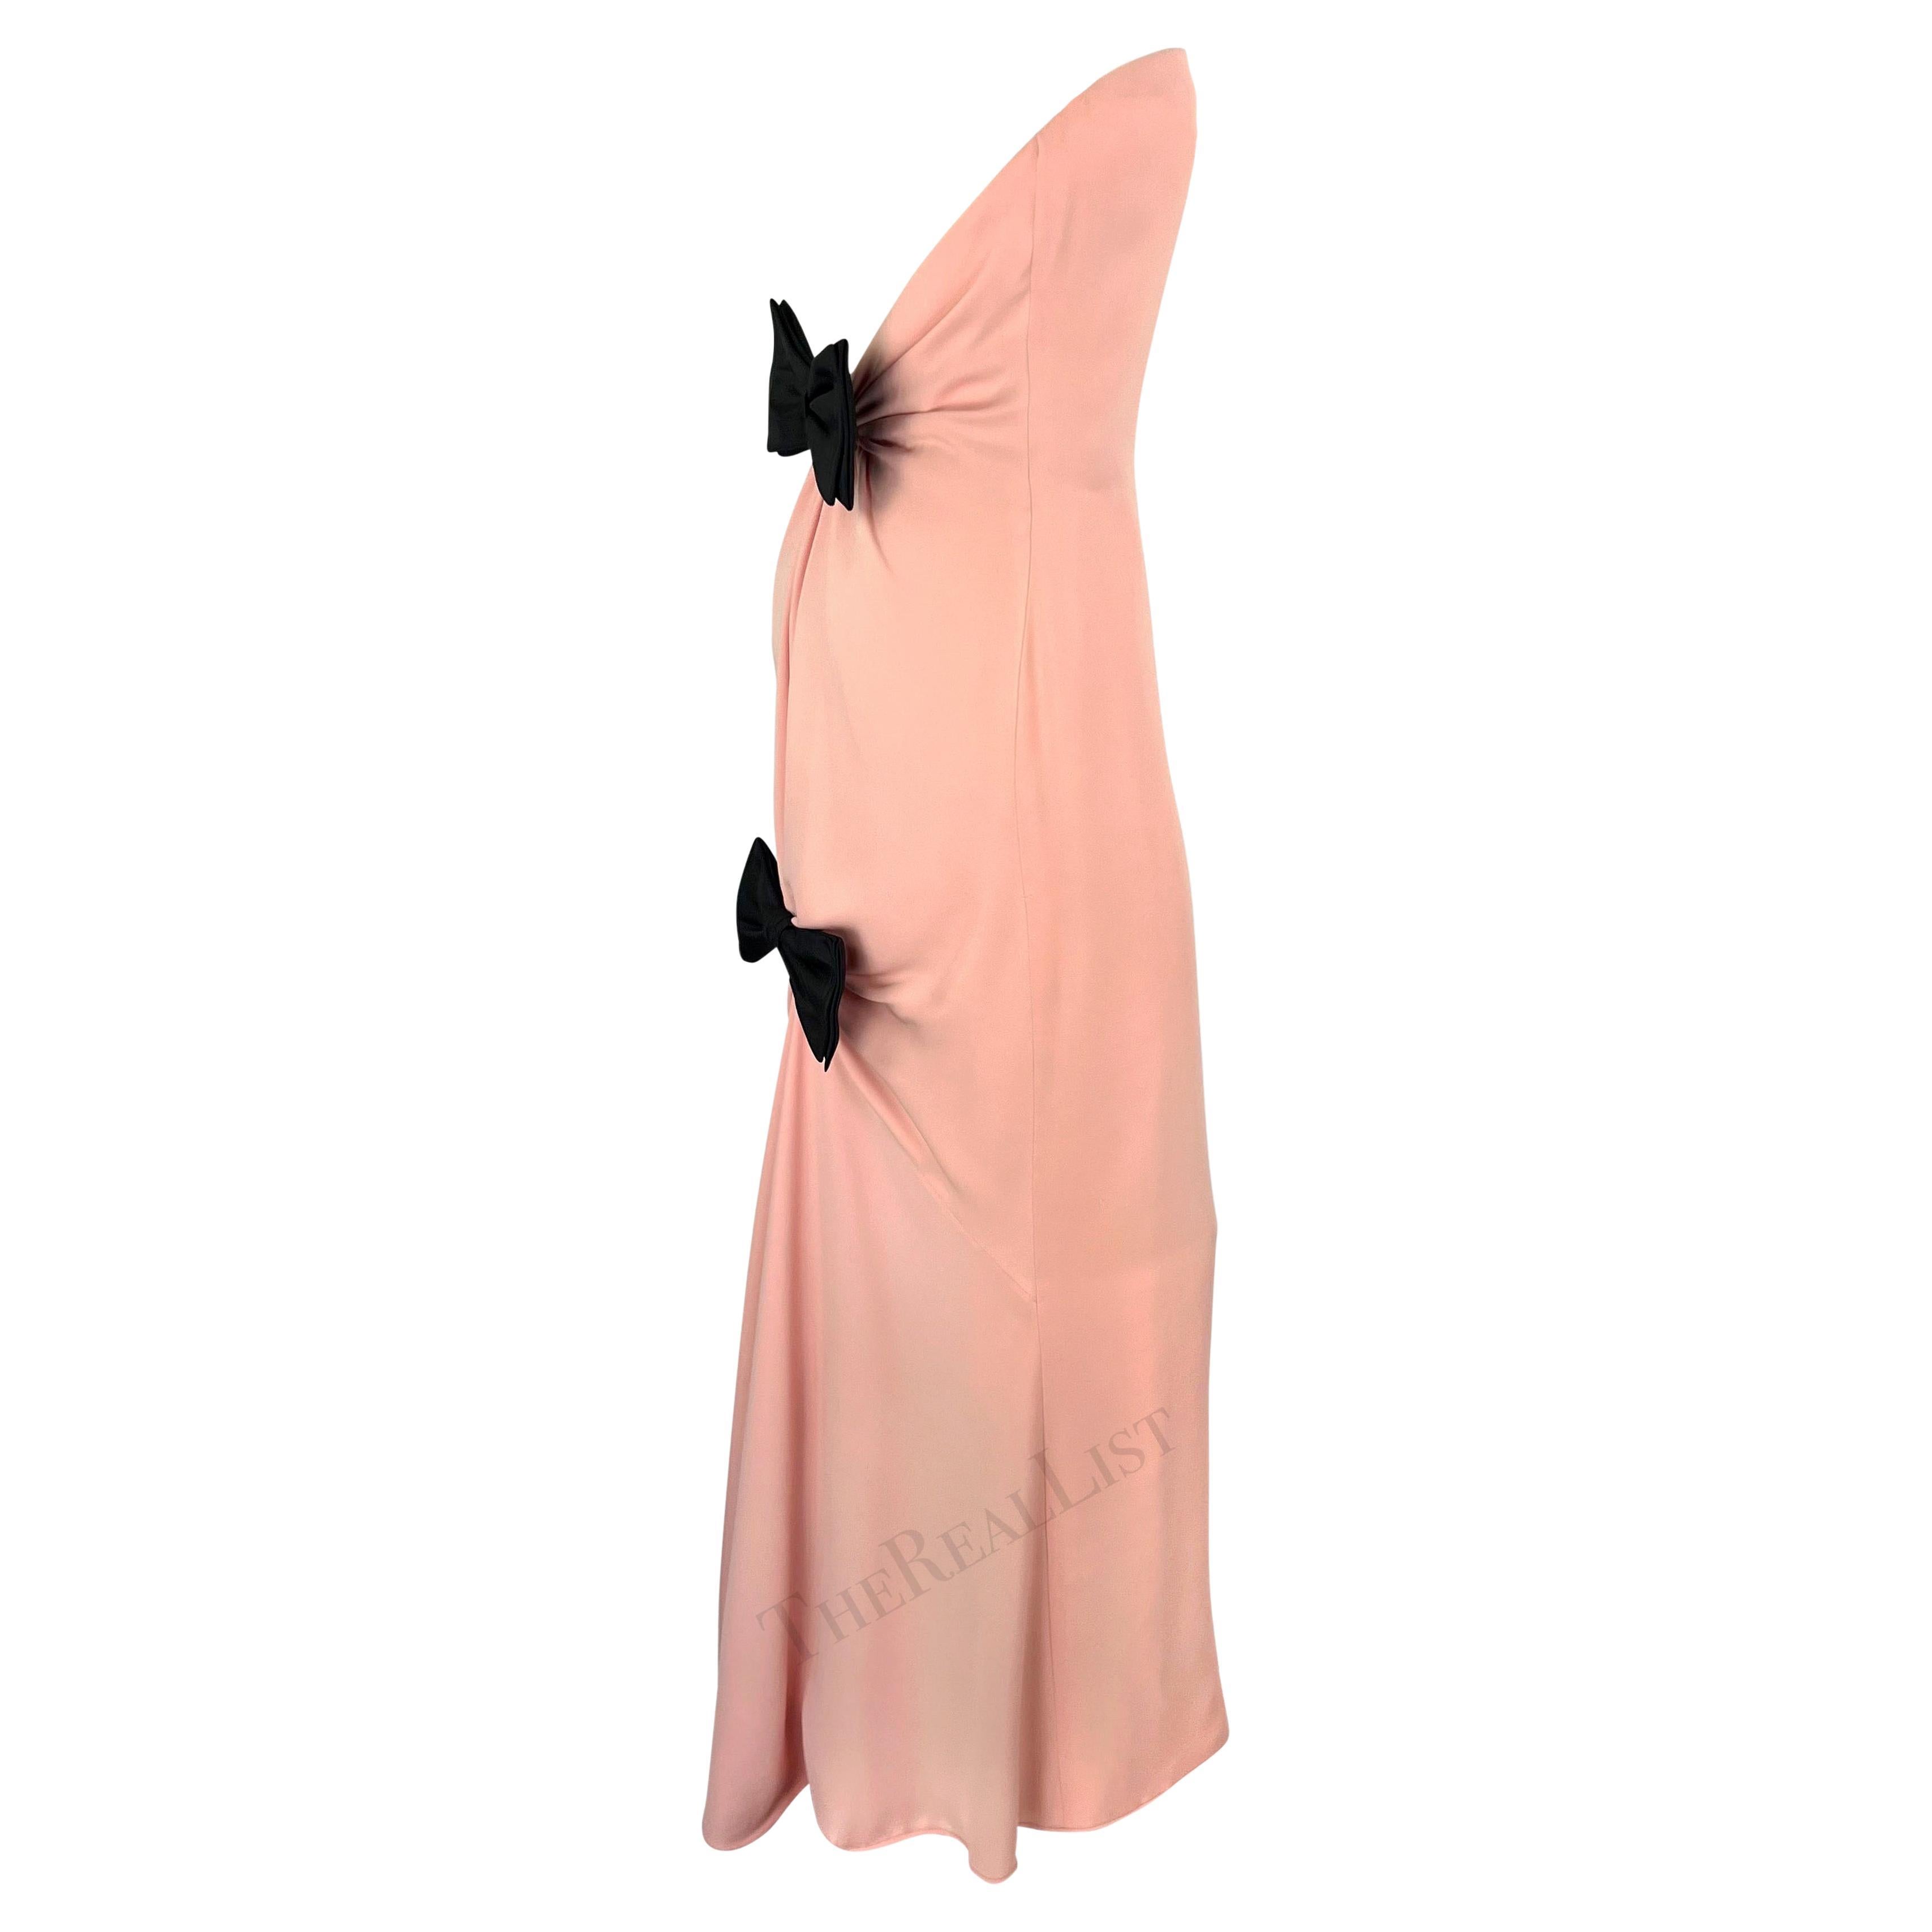 S/S 1985 Valentino Haute Couture Documented Pink Silk Chiffon Bow Strapless Gown For Sale 6